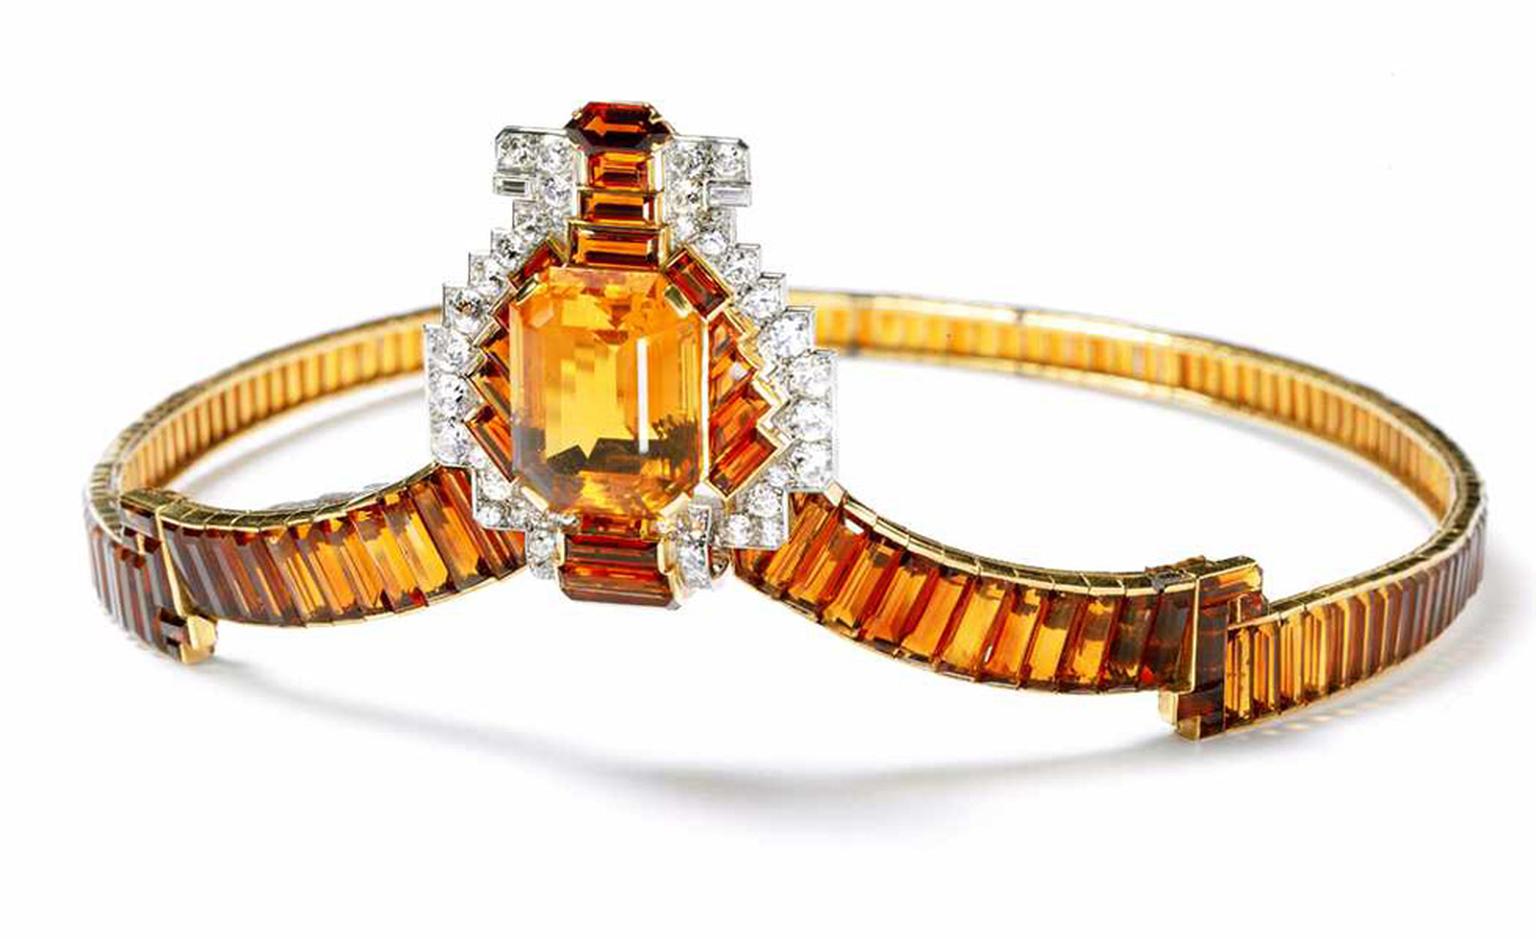 Cartier London Citrine and Diamond Tiara made for the coronation of George VI in 1937. The central element can be dismounted and worn as a brooch. Photo: N. Welsh